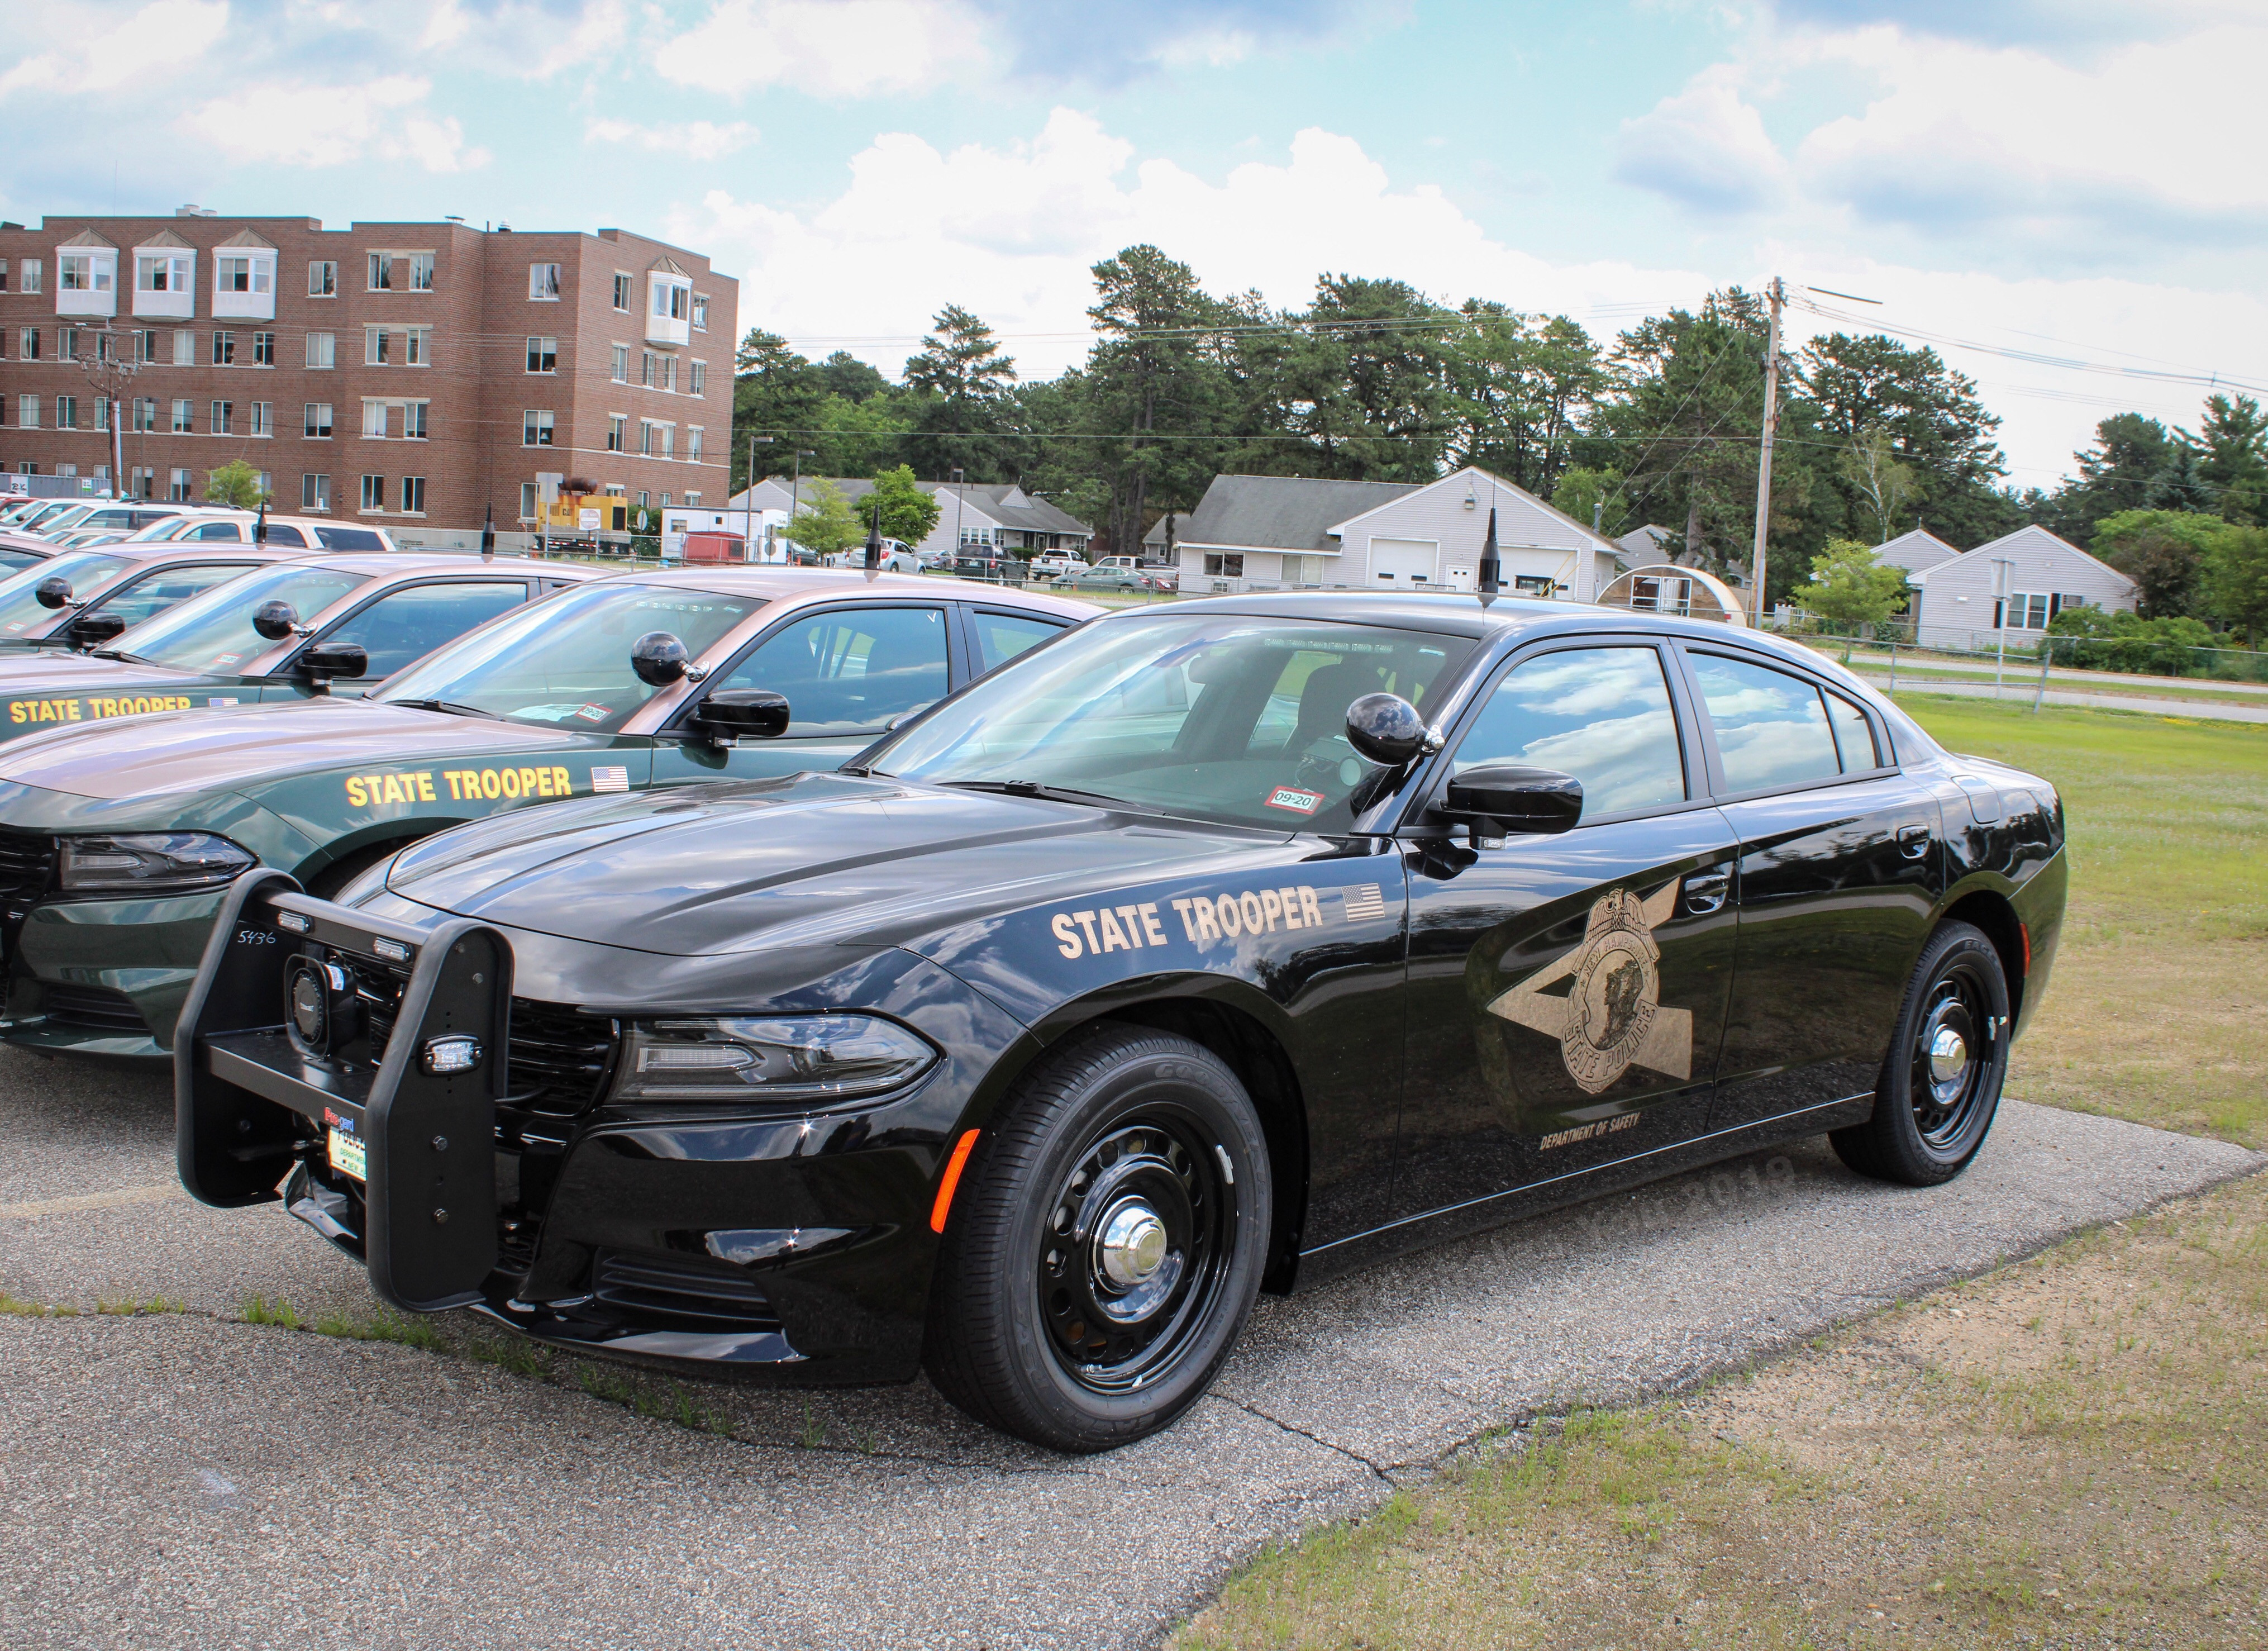 A photo  of New Hampshire State Police
            Cruiser 720, a 2015-2019 Dodge Charger             taken by Nicholas You